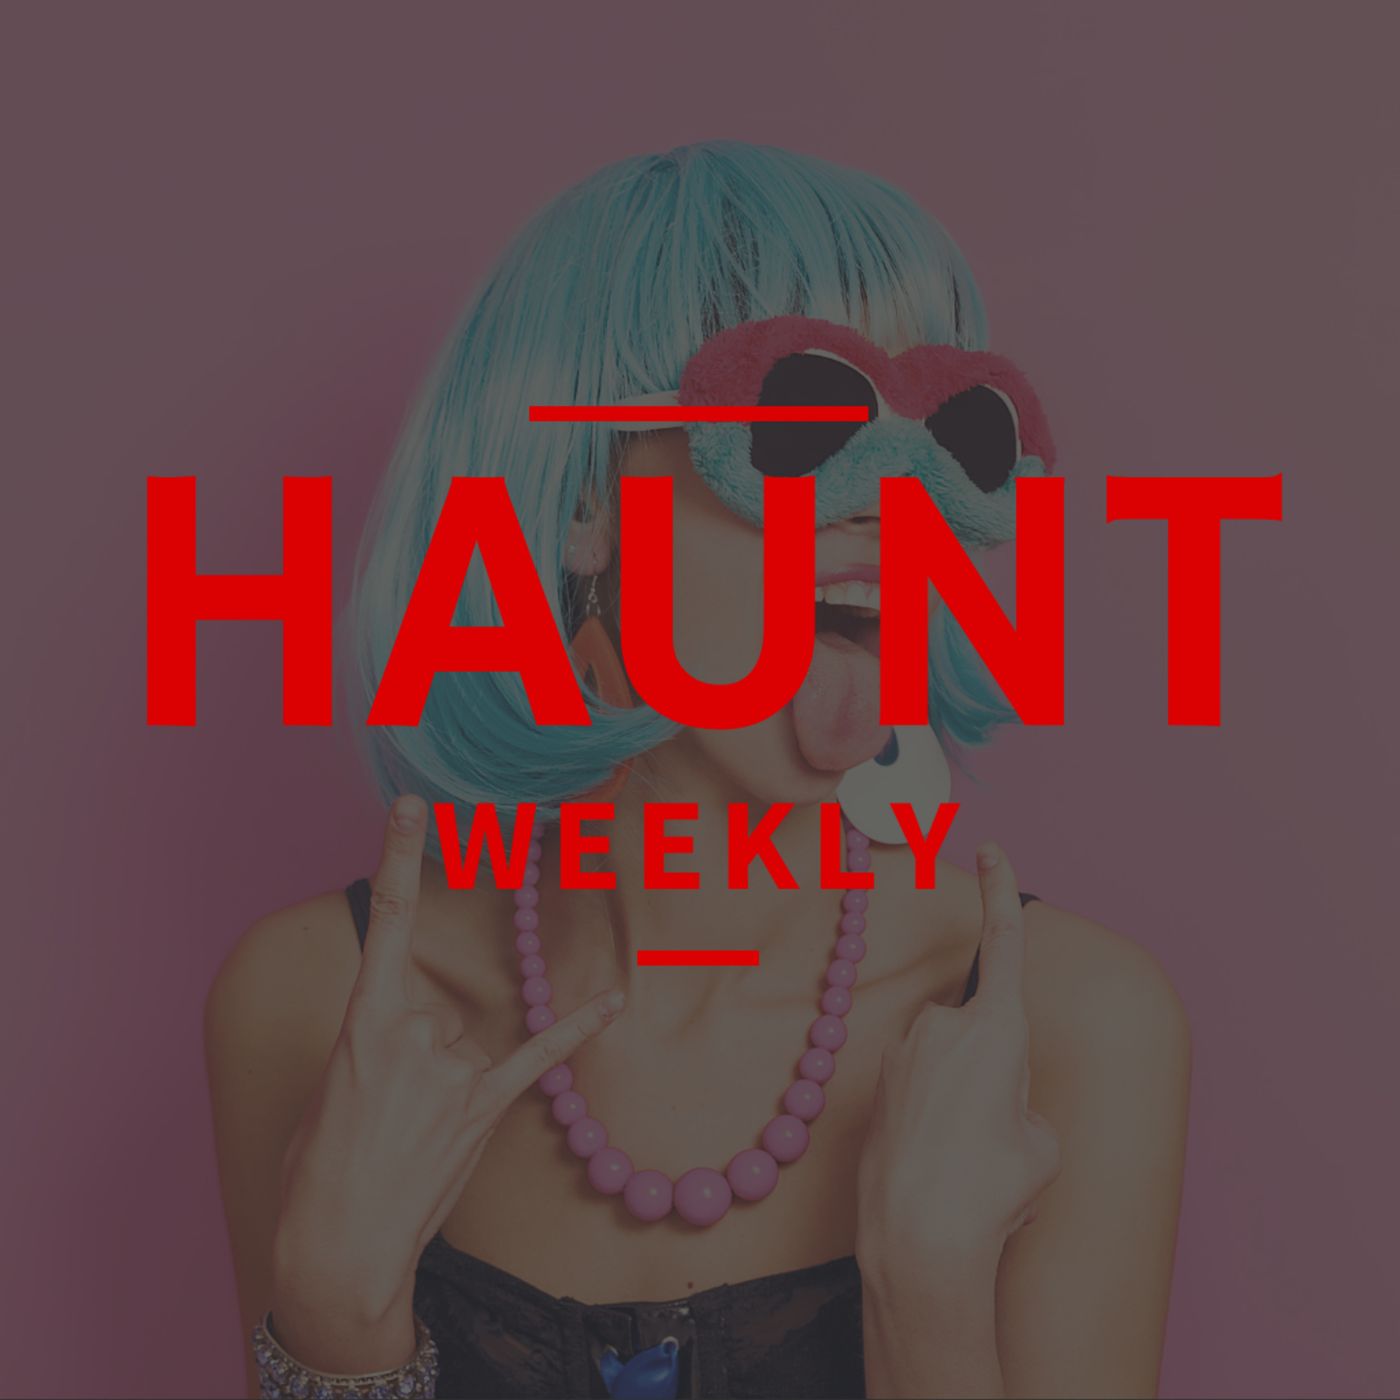 [Haunt Weekly] Episode 209 -  13 Things Haunters Have/Do That's Not Normal